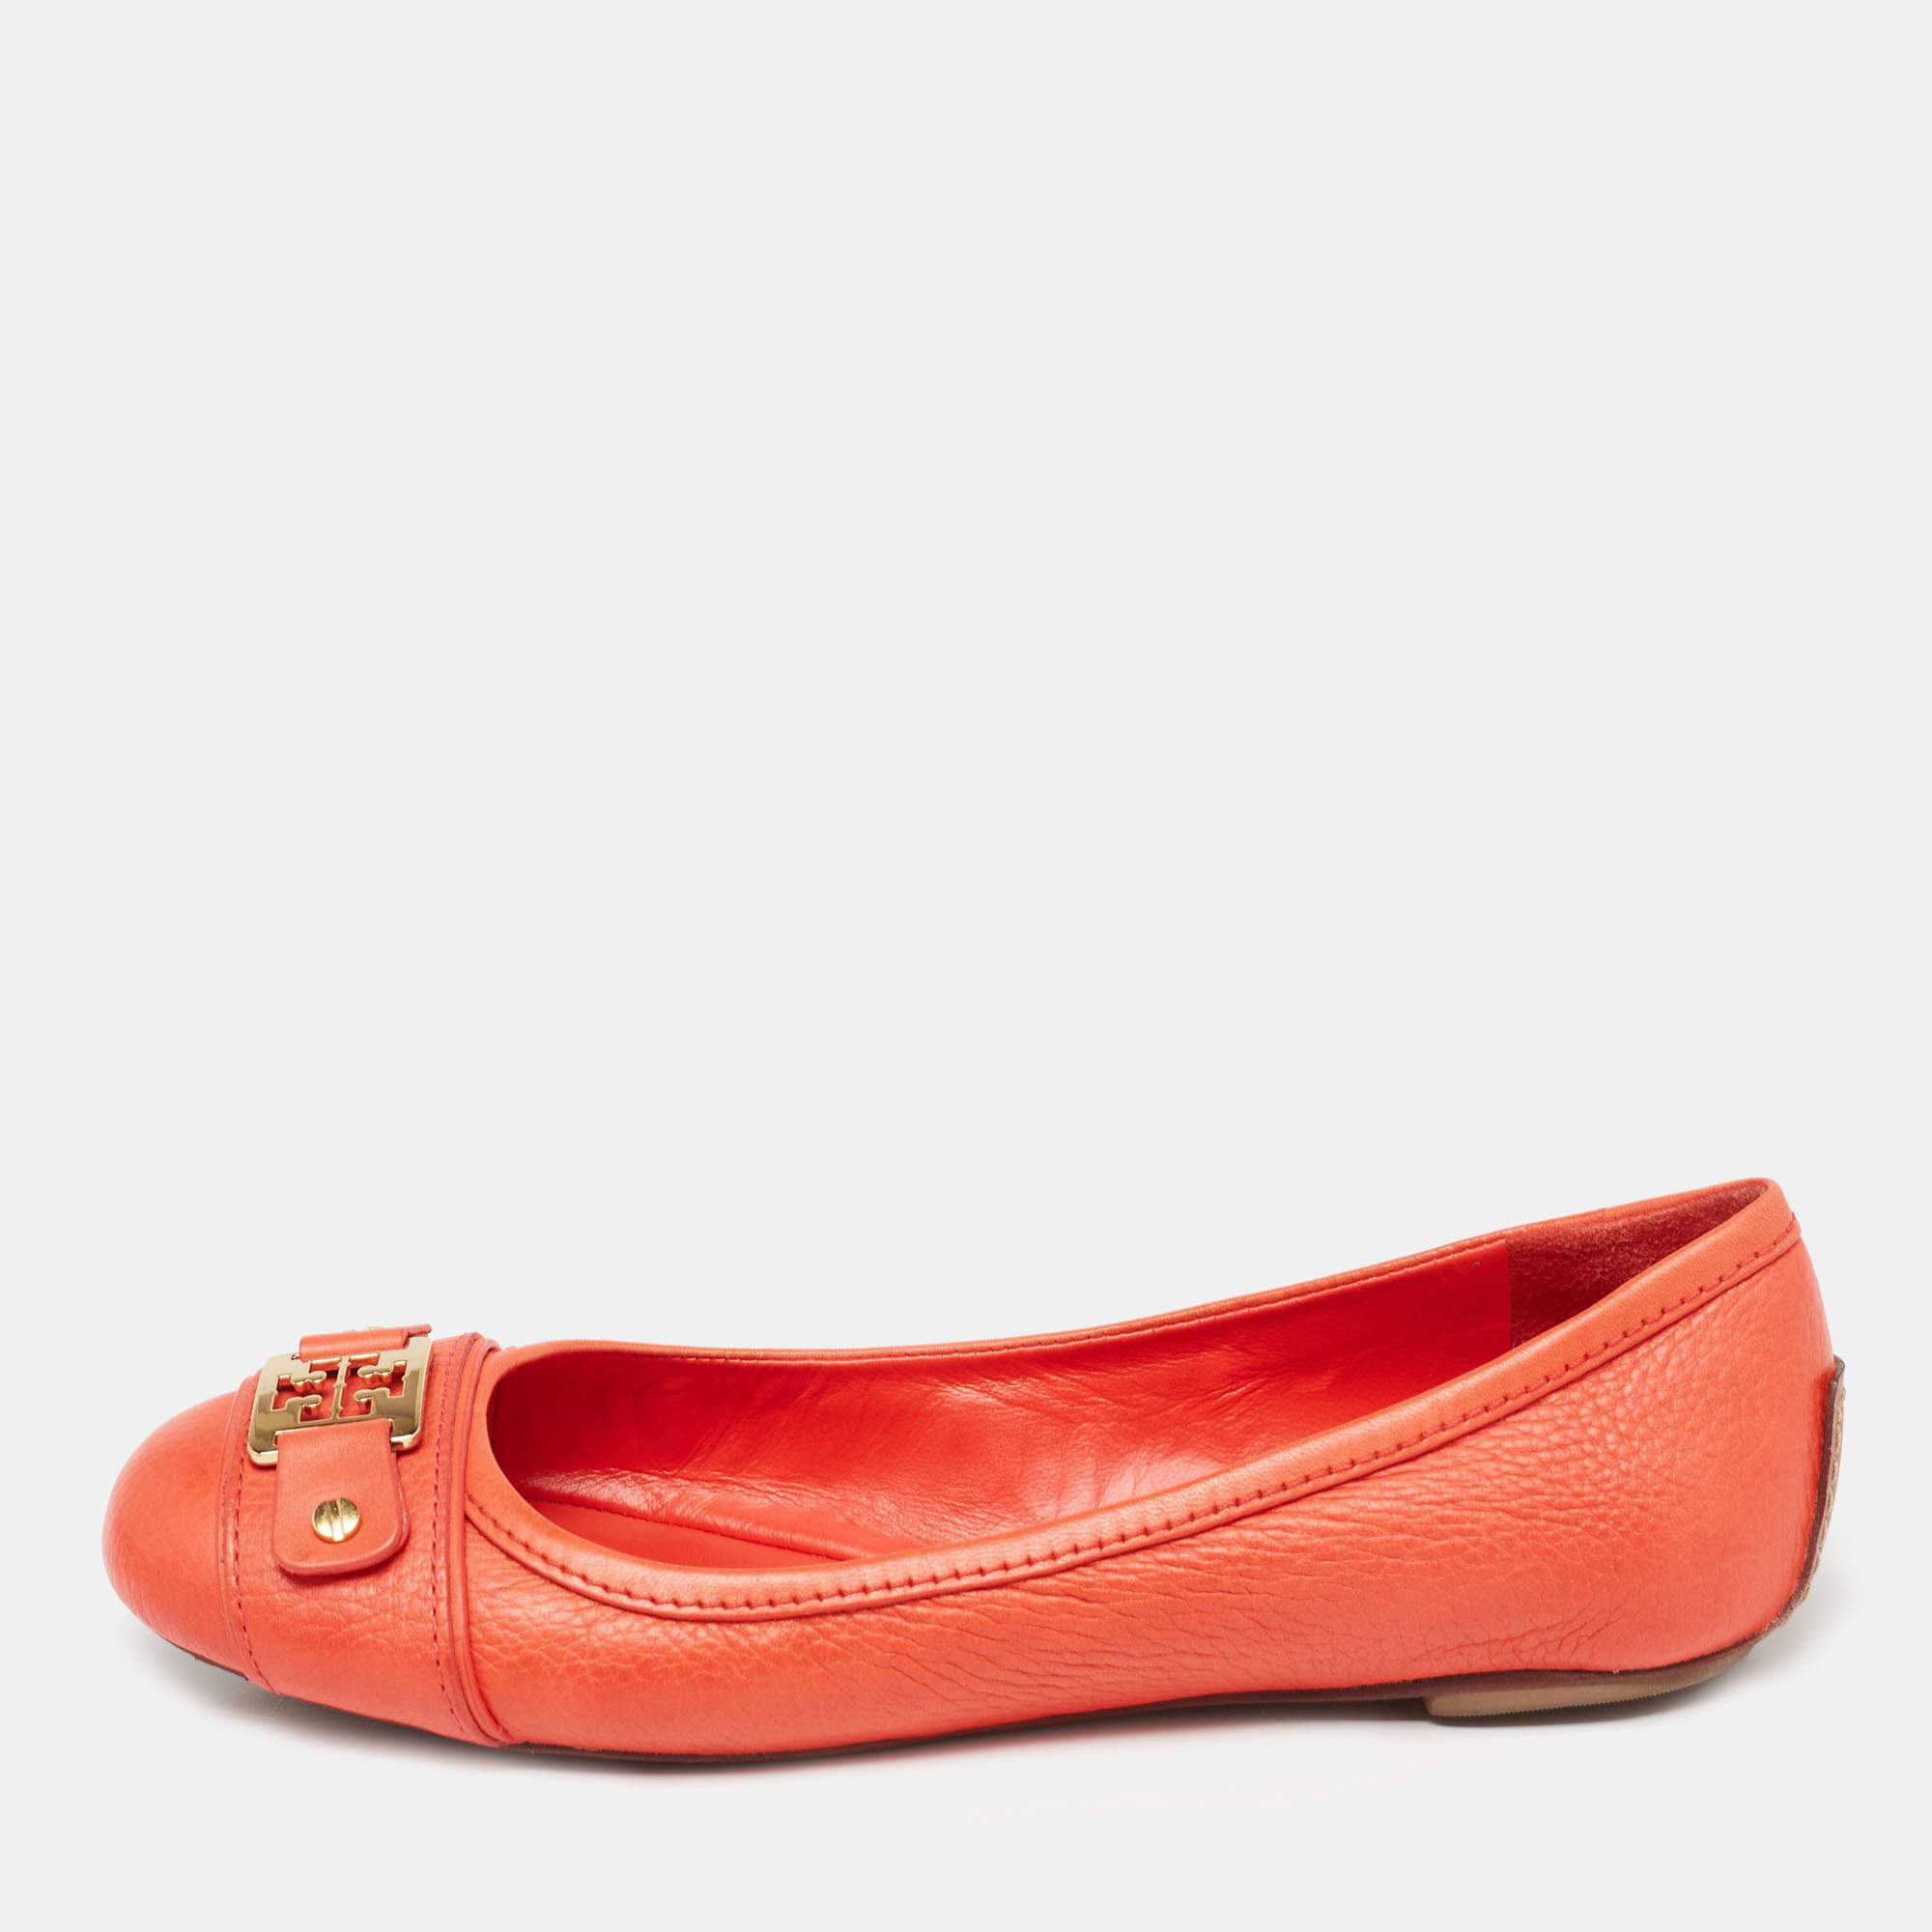 Tory Burch Scarlet Red Leather Cline Ballet Flats Size  Tory Burch | TLC